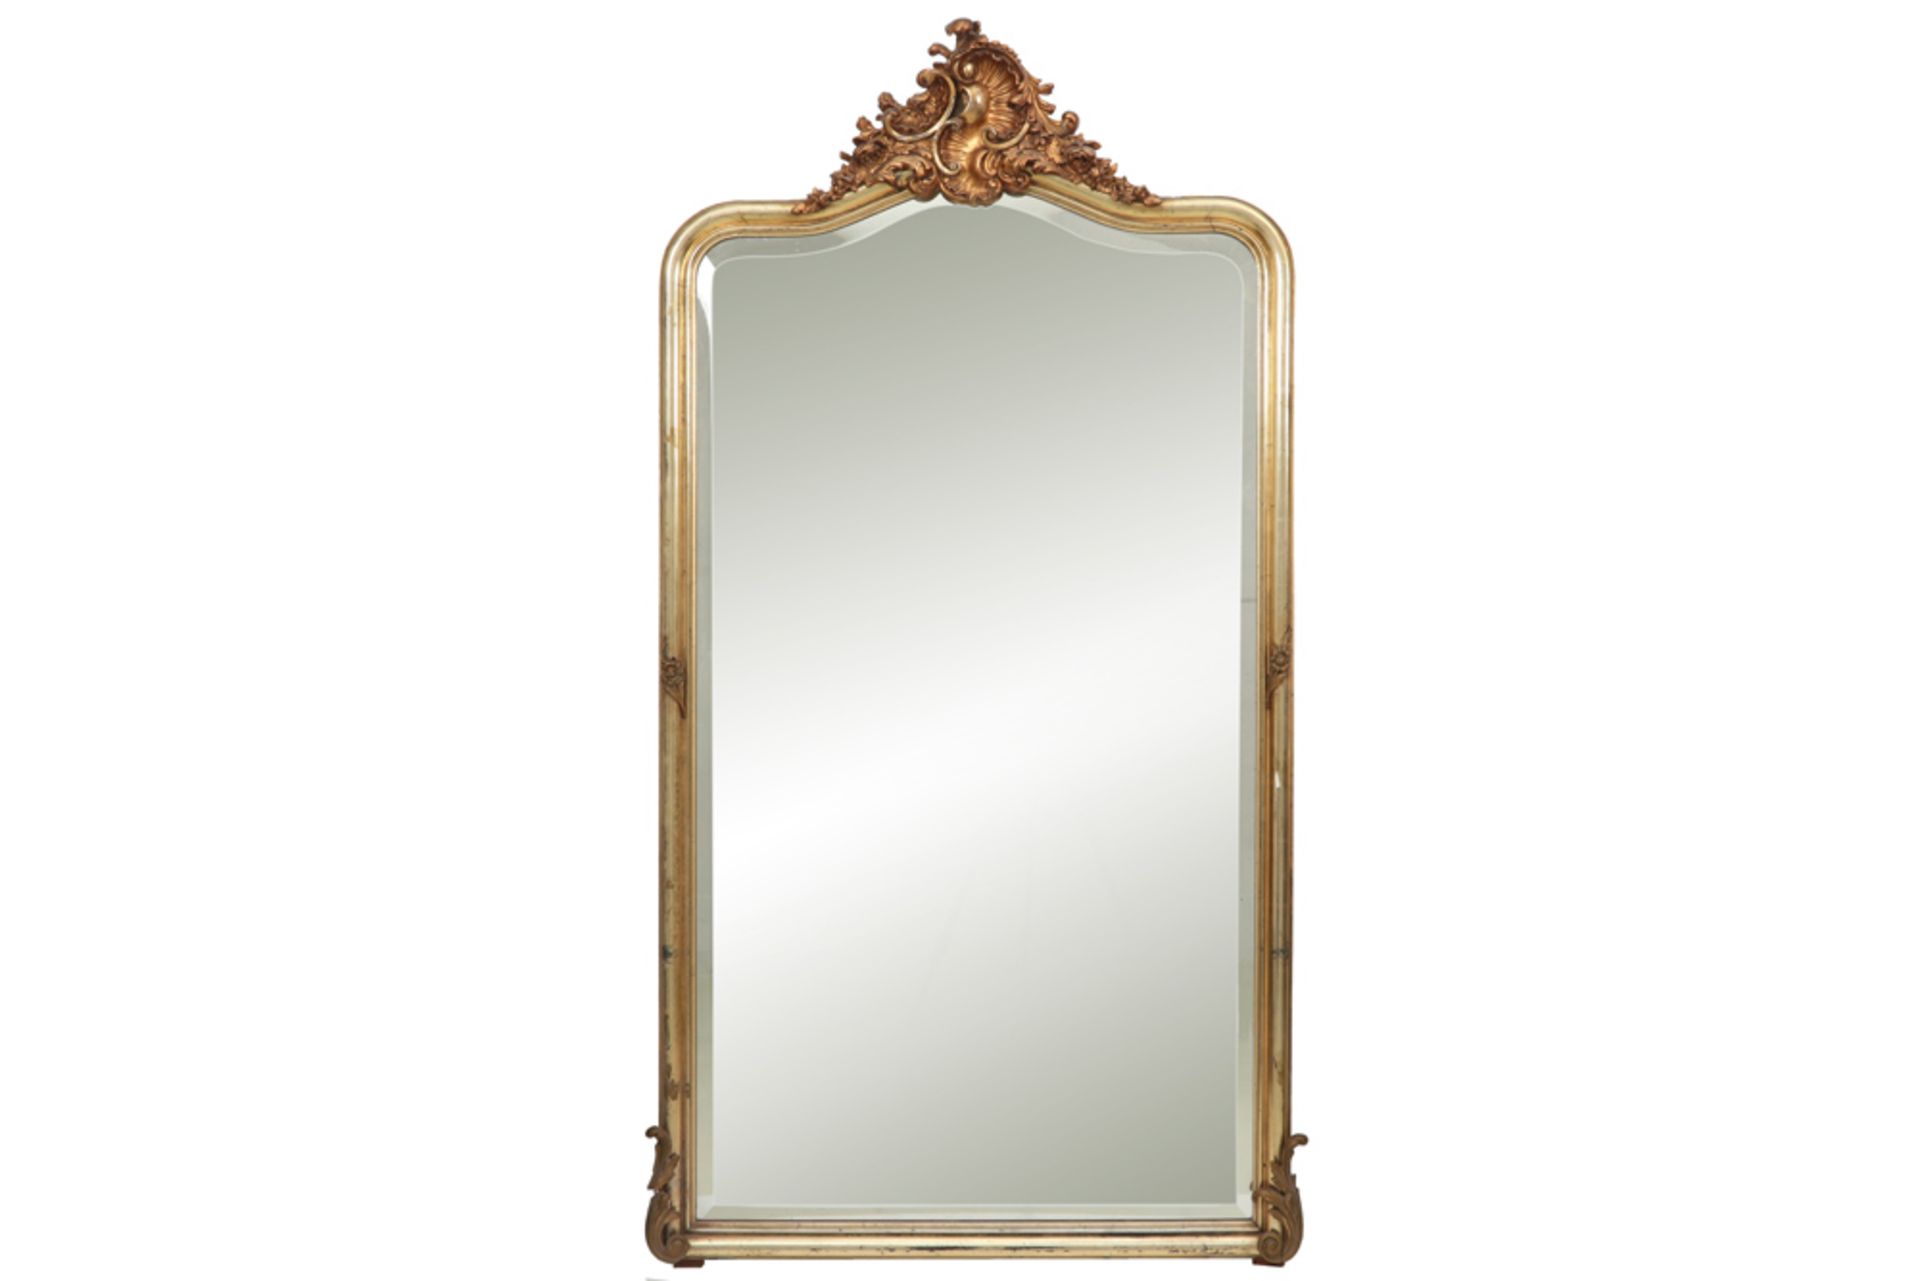 19th Cent. mirror with a gilded frame with Louis XV ornamentation || Negentiende eeuwse